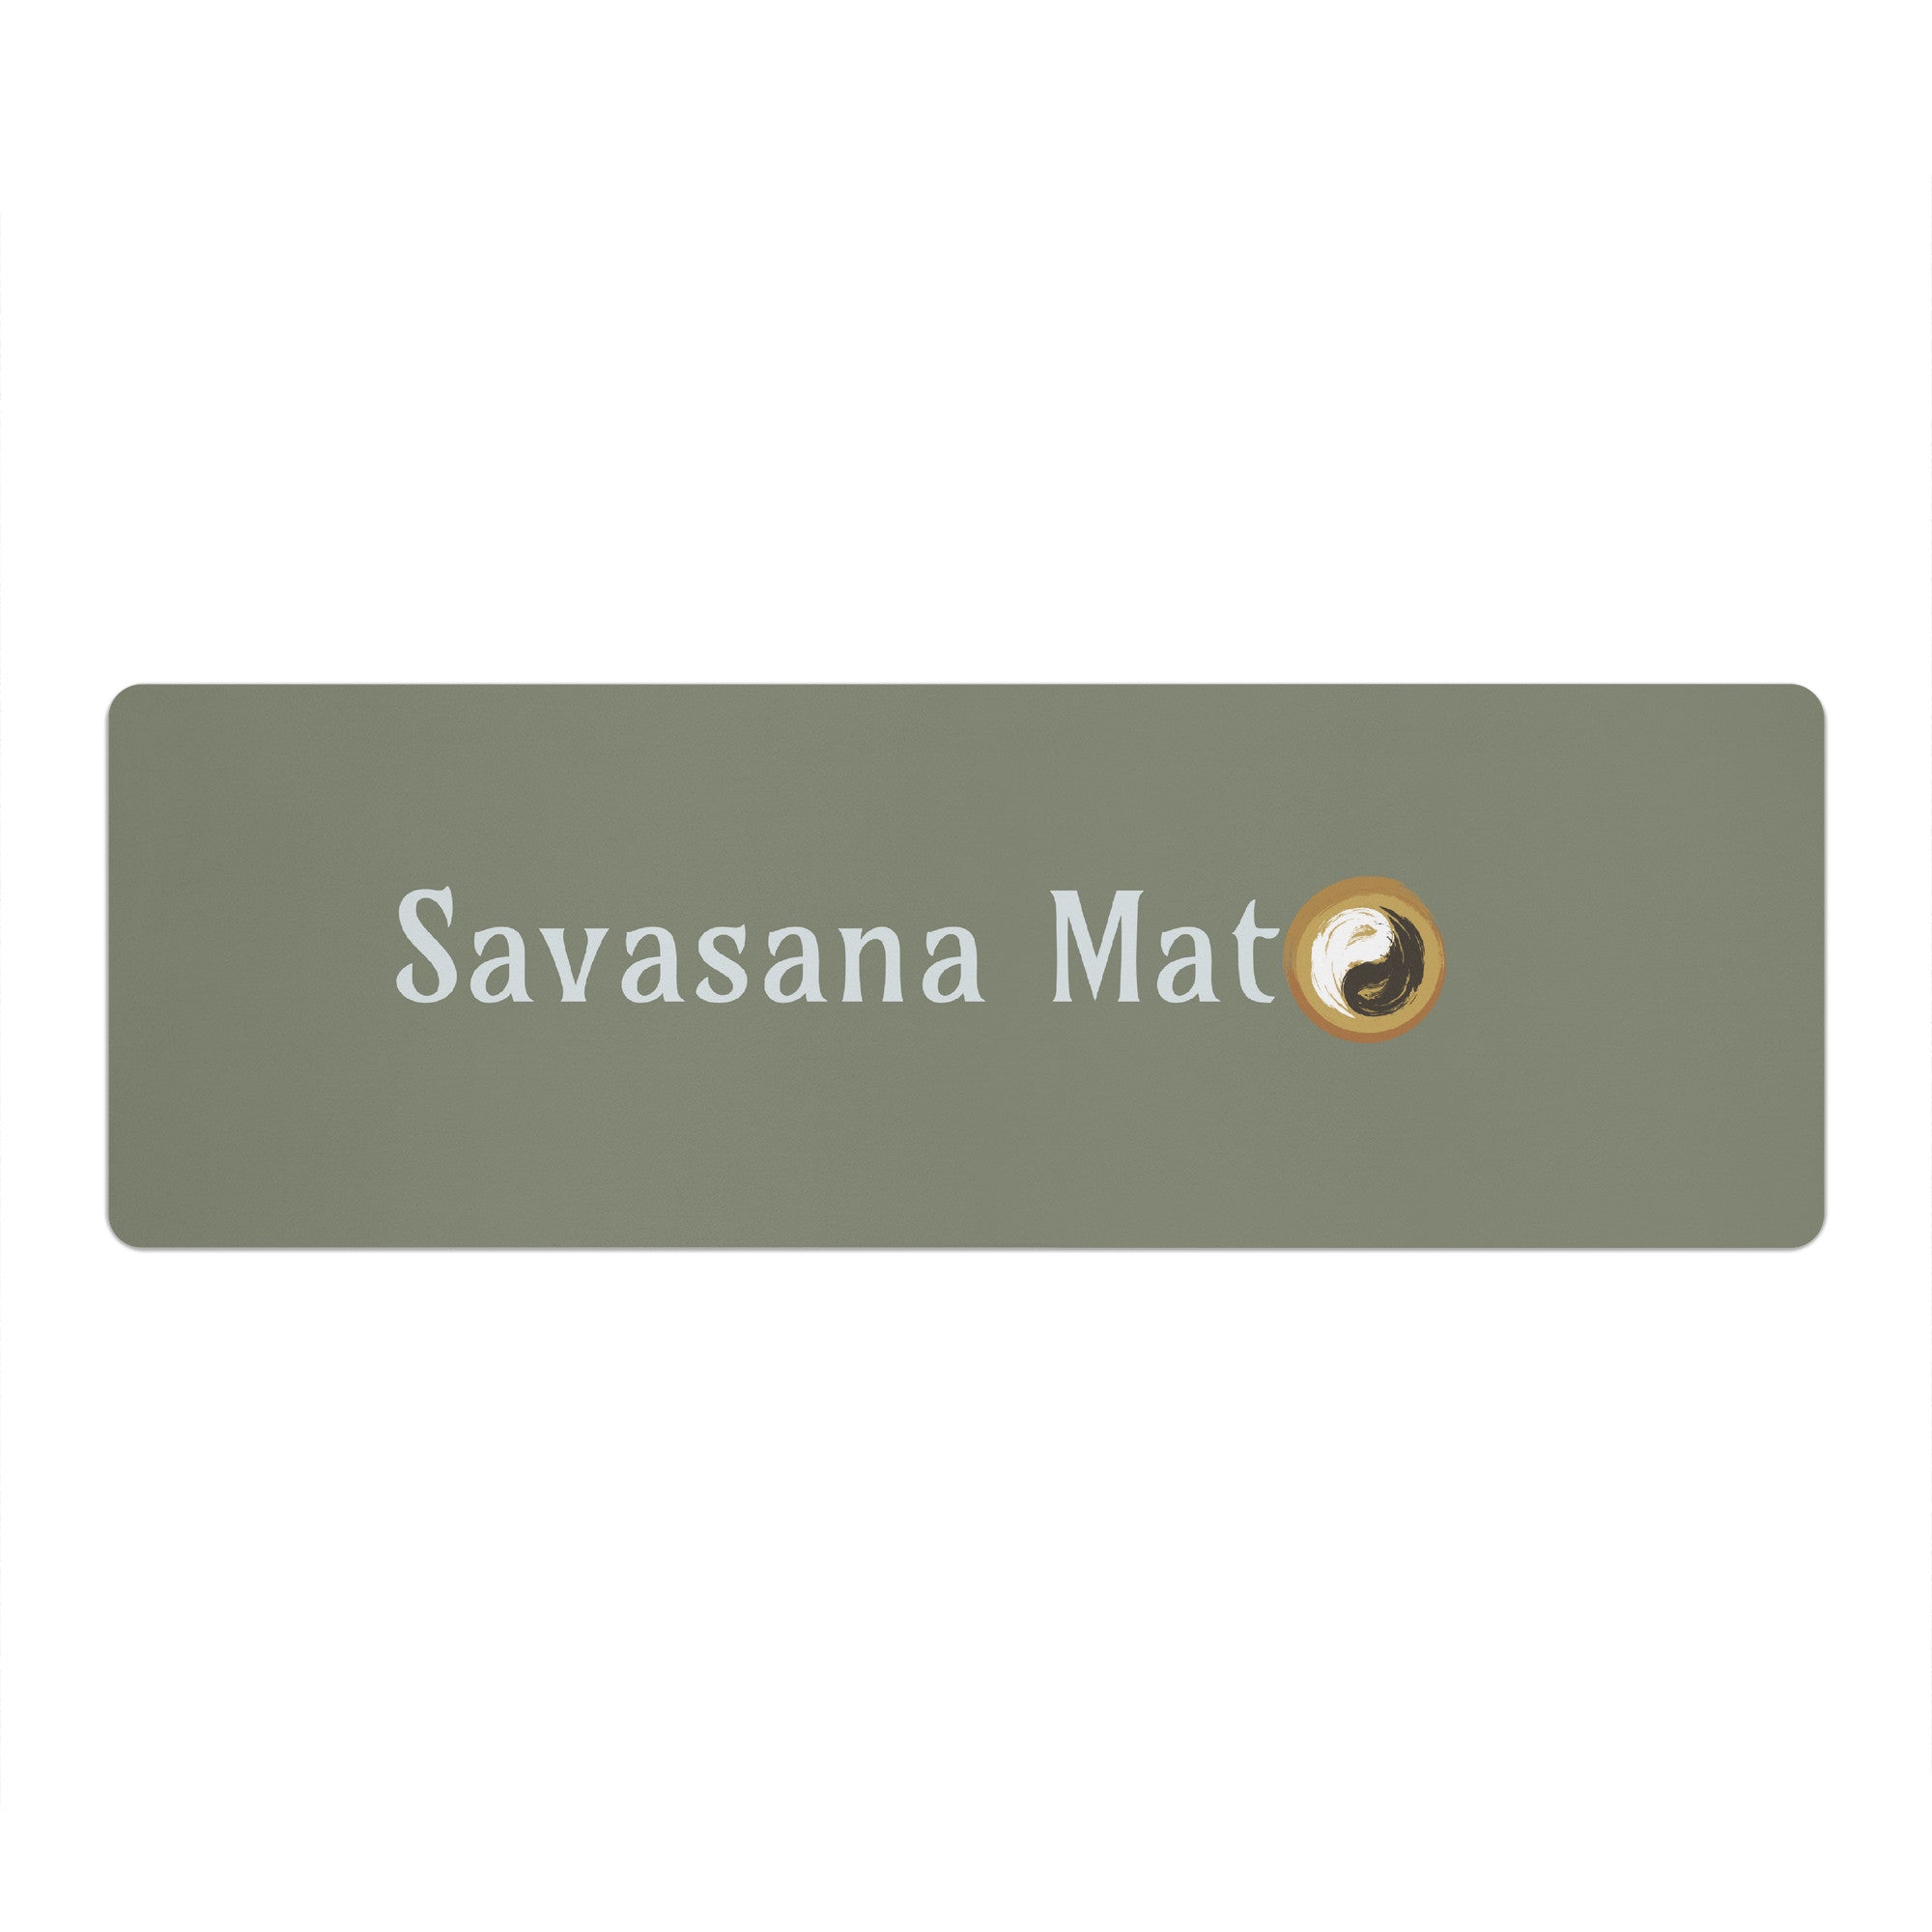 Savasana Yoga Mat - Rubber - Non Slip and Suede Surface Mat - Personal Hour for Yoga and Meditations 